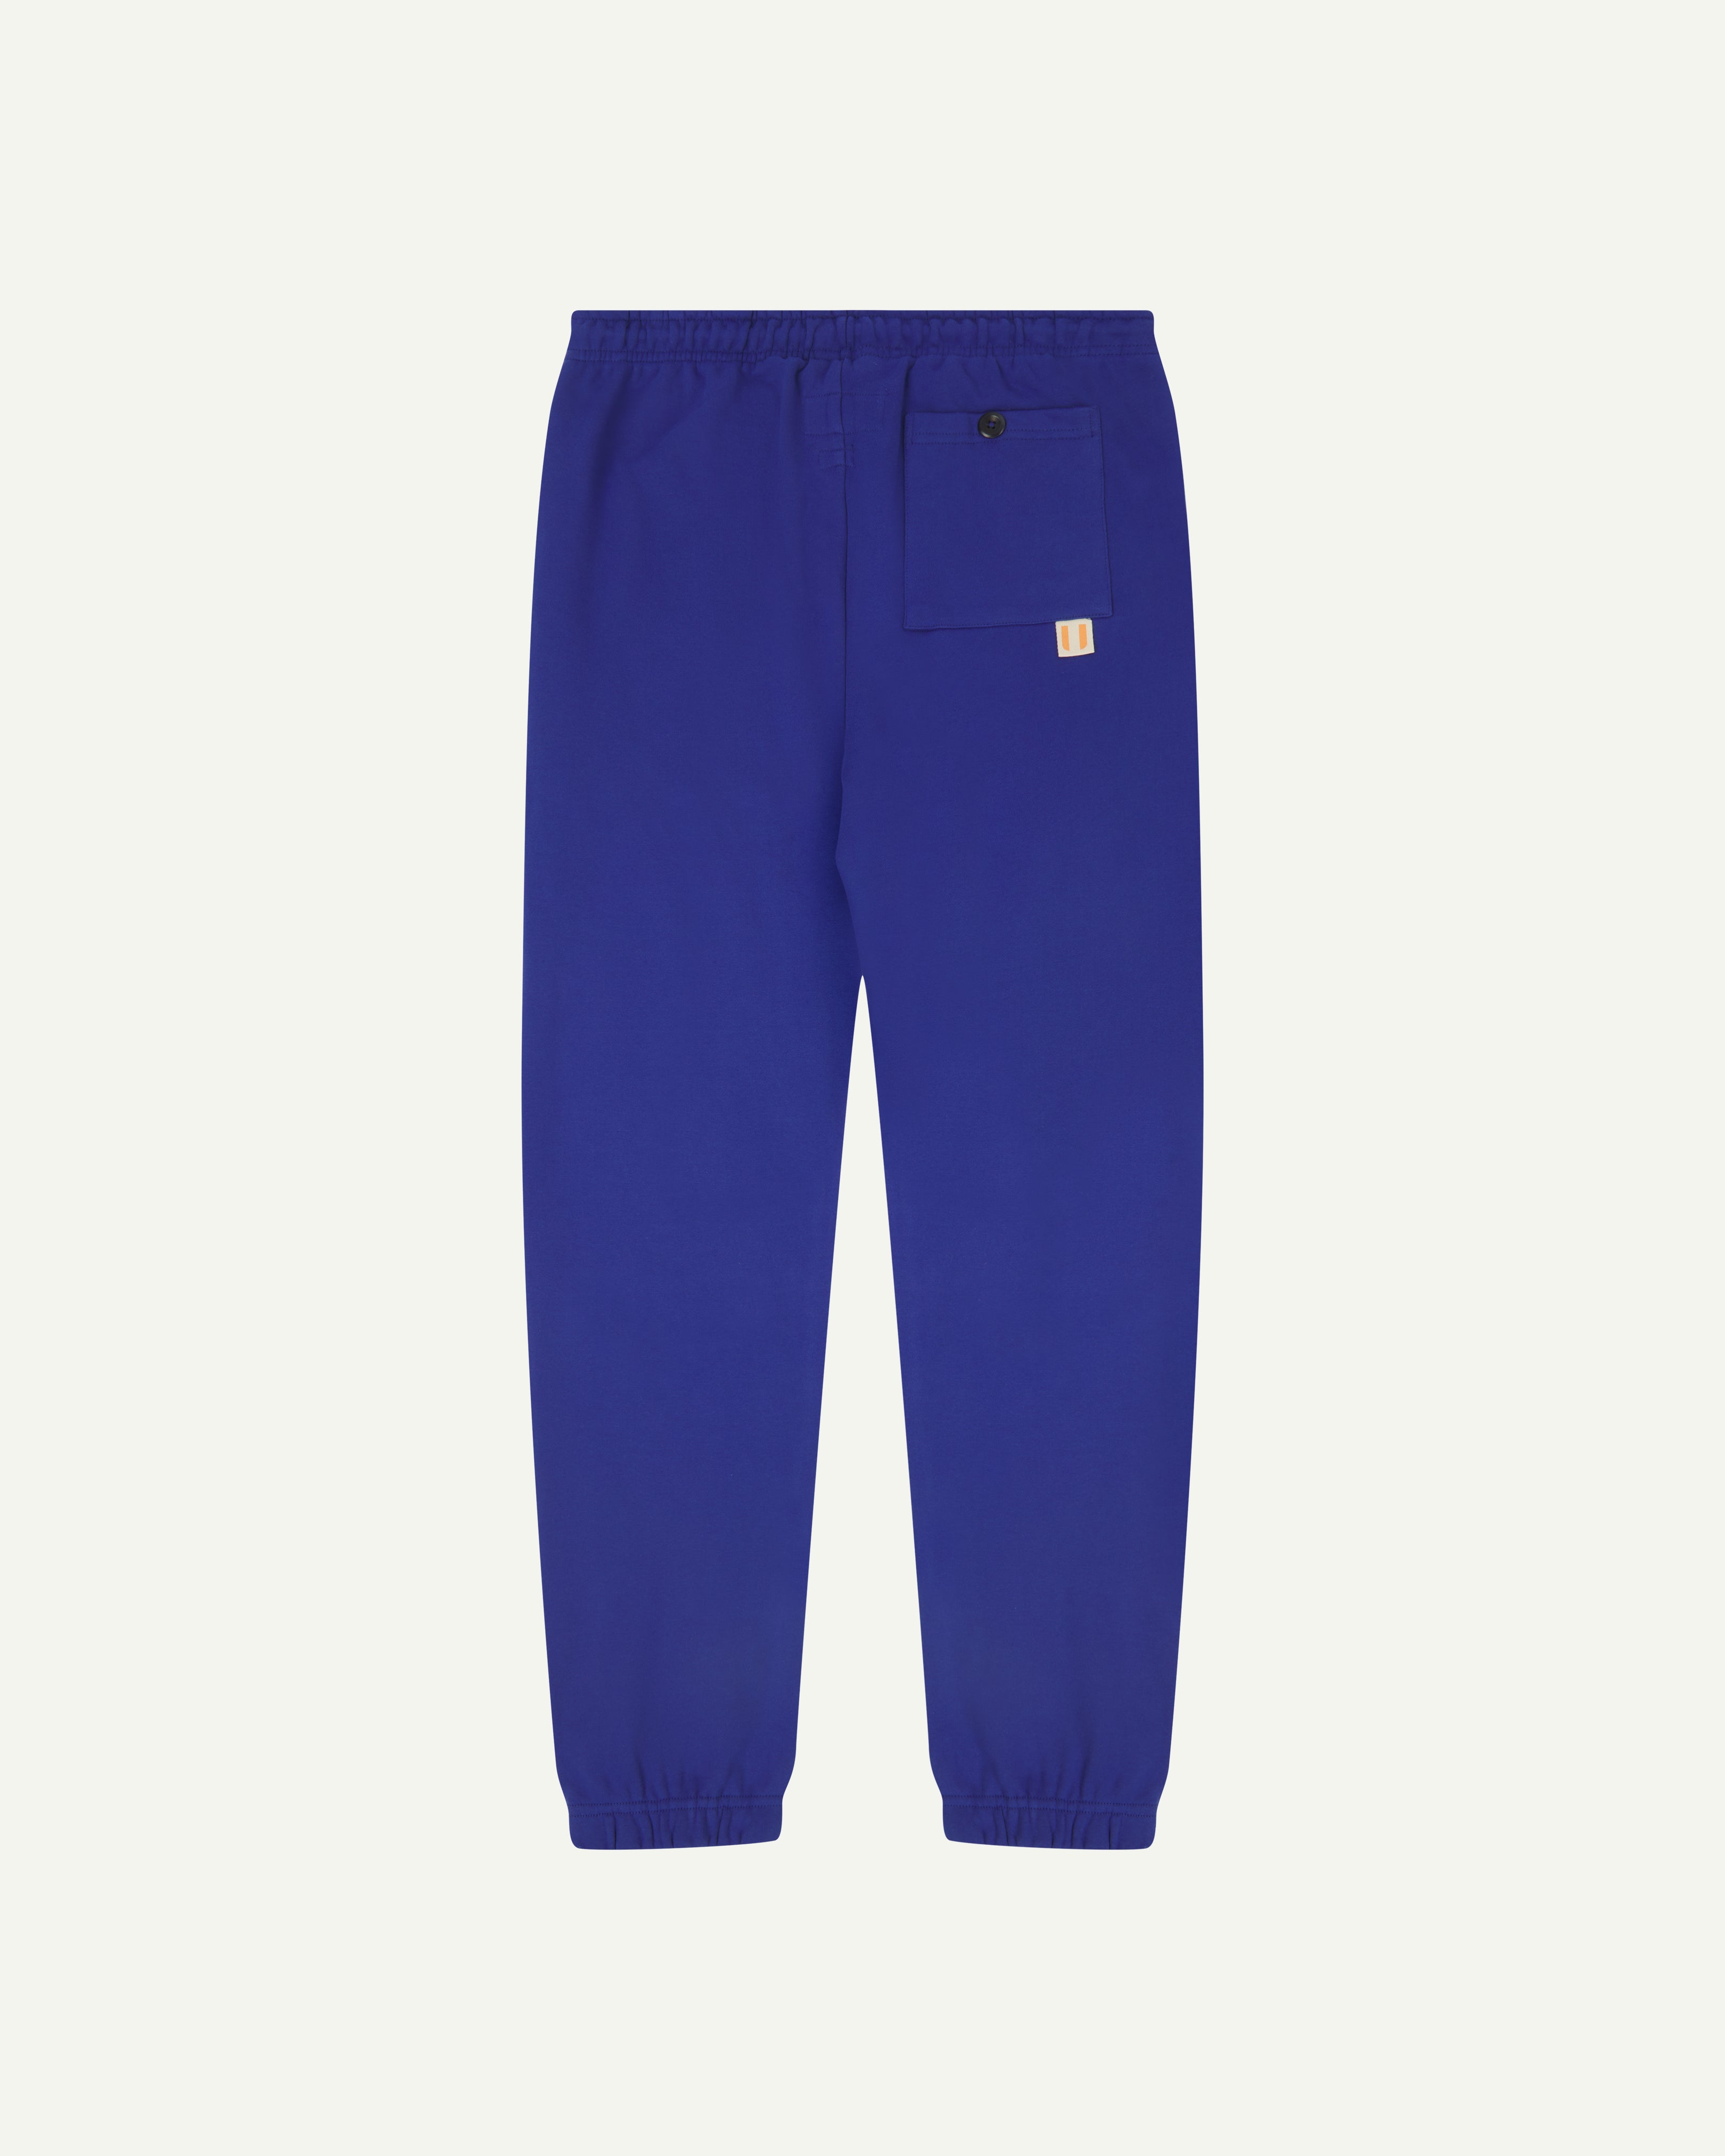 Back view of bright blue organic cotton Joggers for men by Uskees